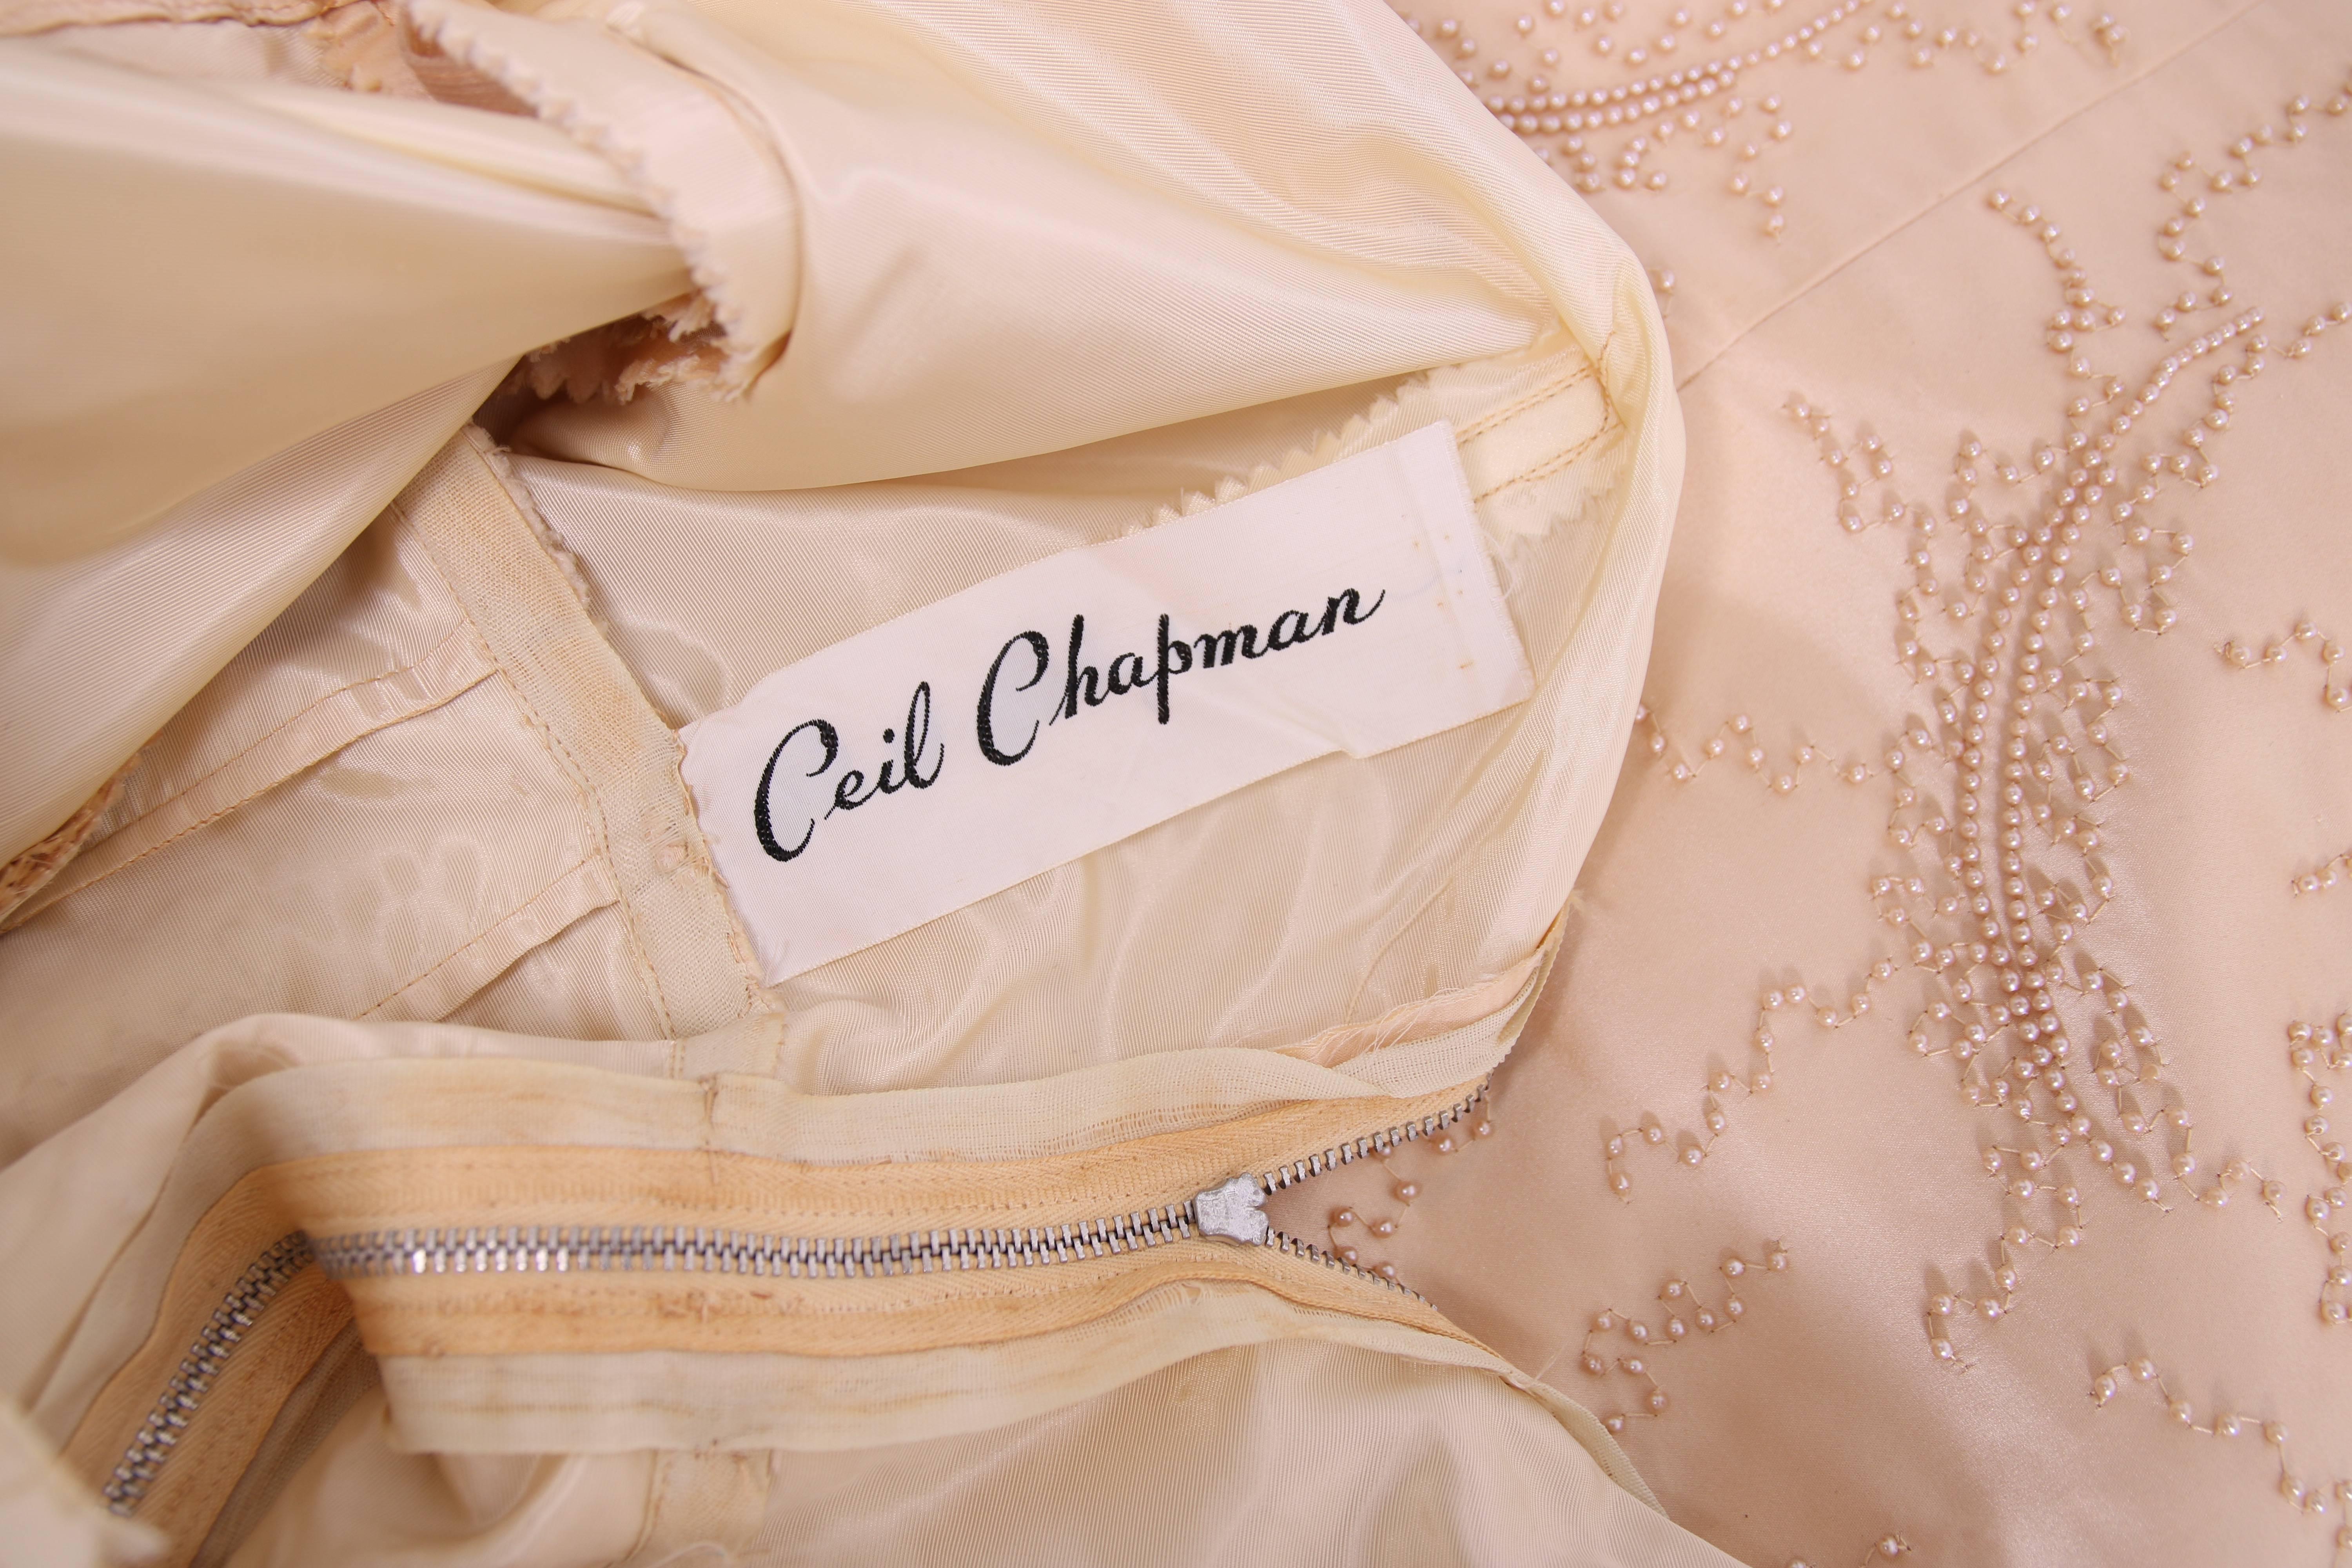 Women's Ceil Chapman Champagne-Colored Satin Beaded Cocktail Dress Ca. 1965 For Sale